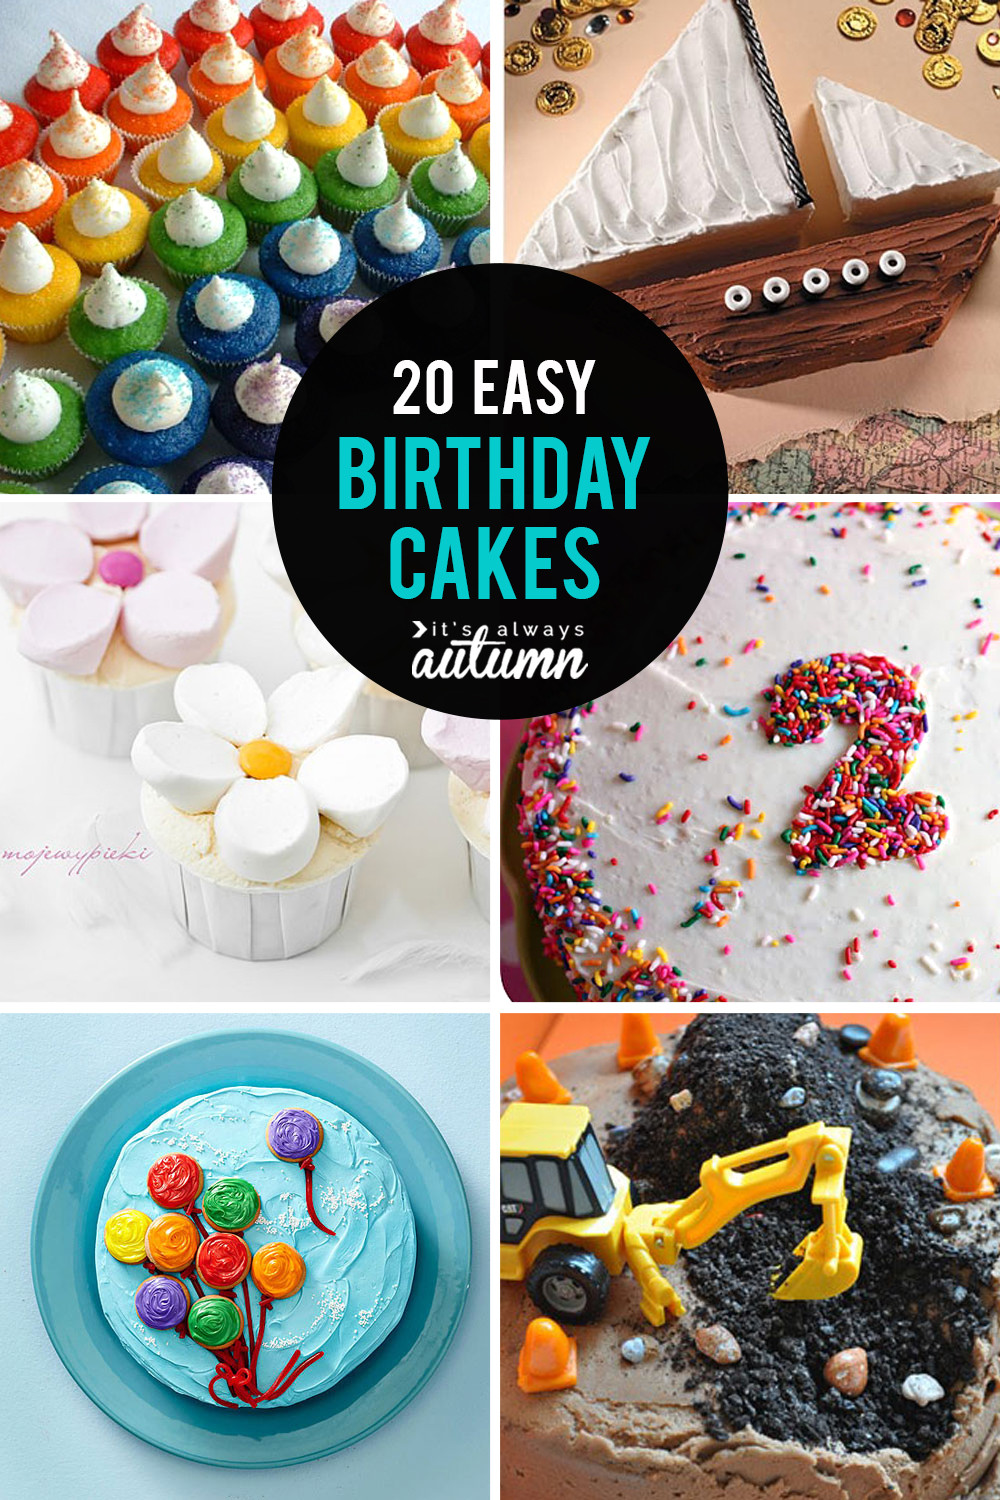 Birthday Cake Decorating Ideas
 20 easy birthday cakes that anyone can decorate It s